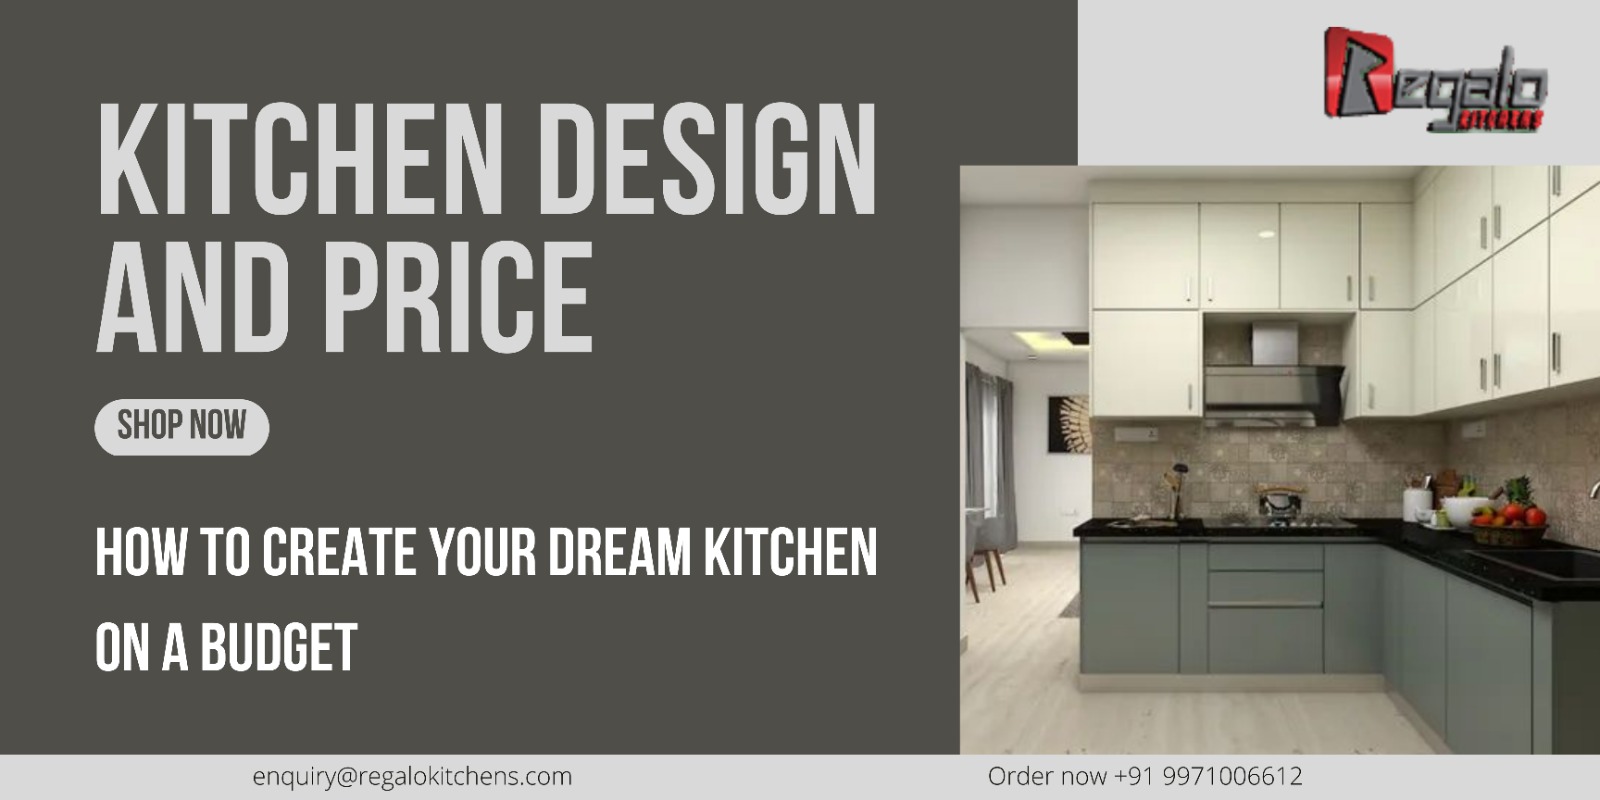 Kitchen Design and Price: How to Create Your Dream Kitchen on a Budget